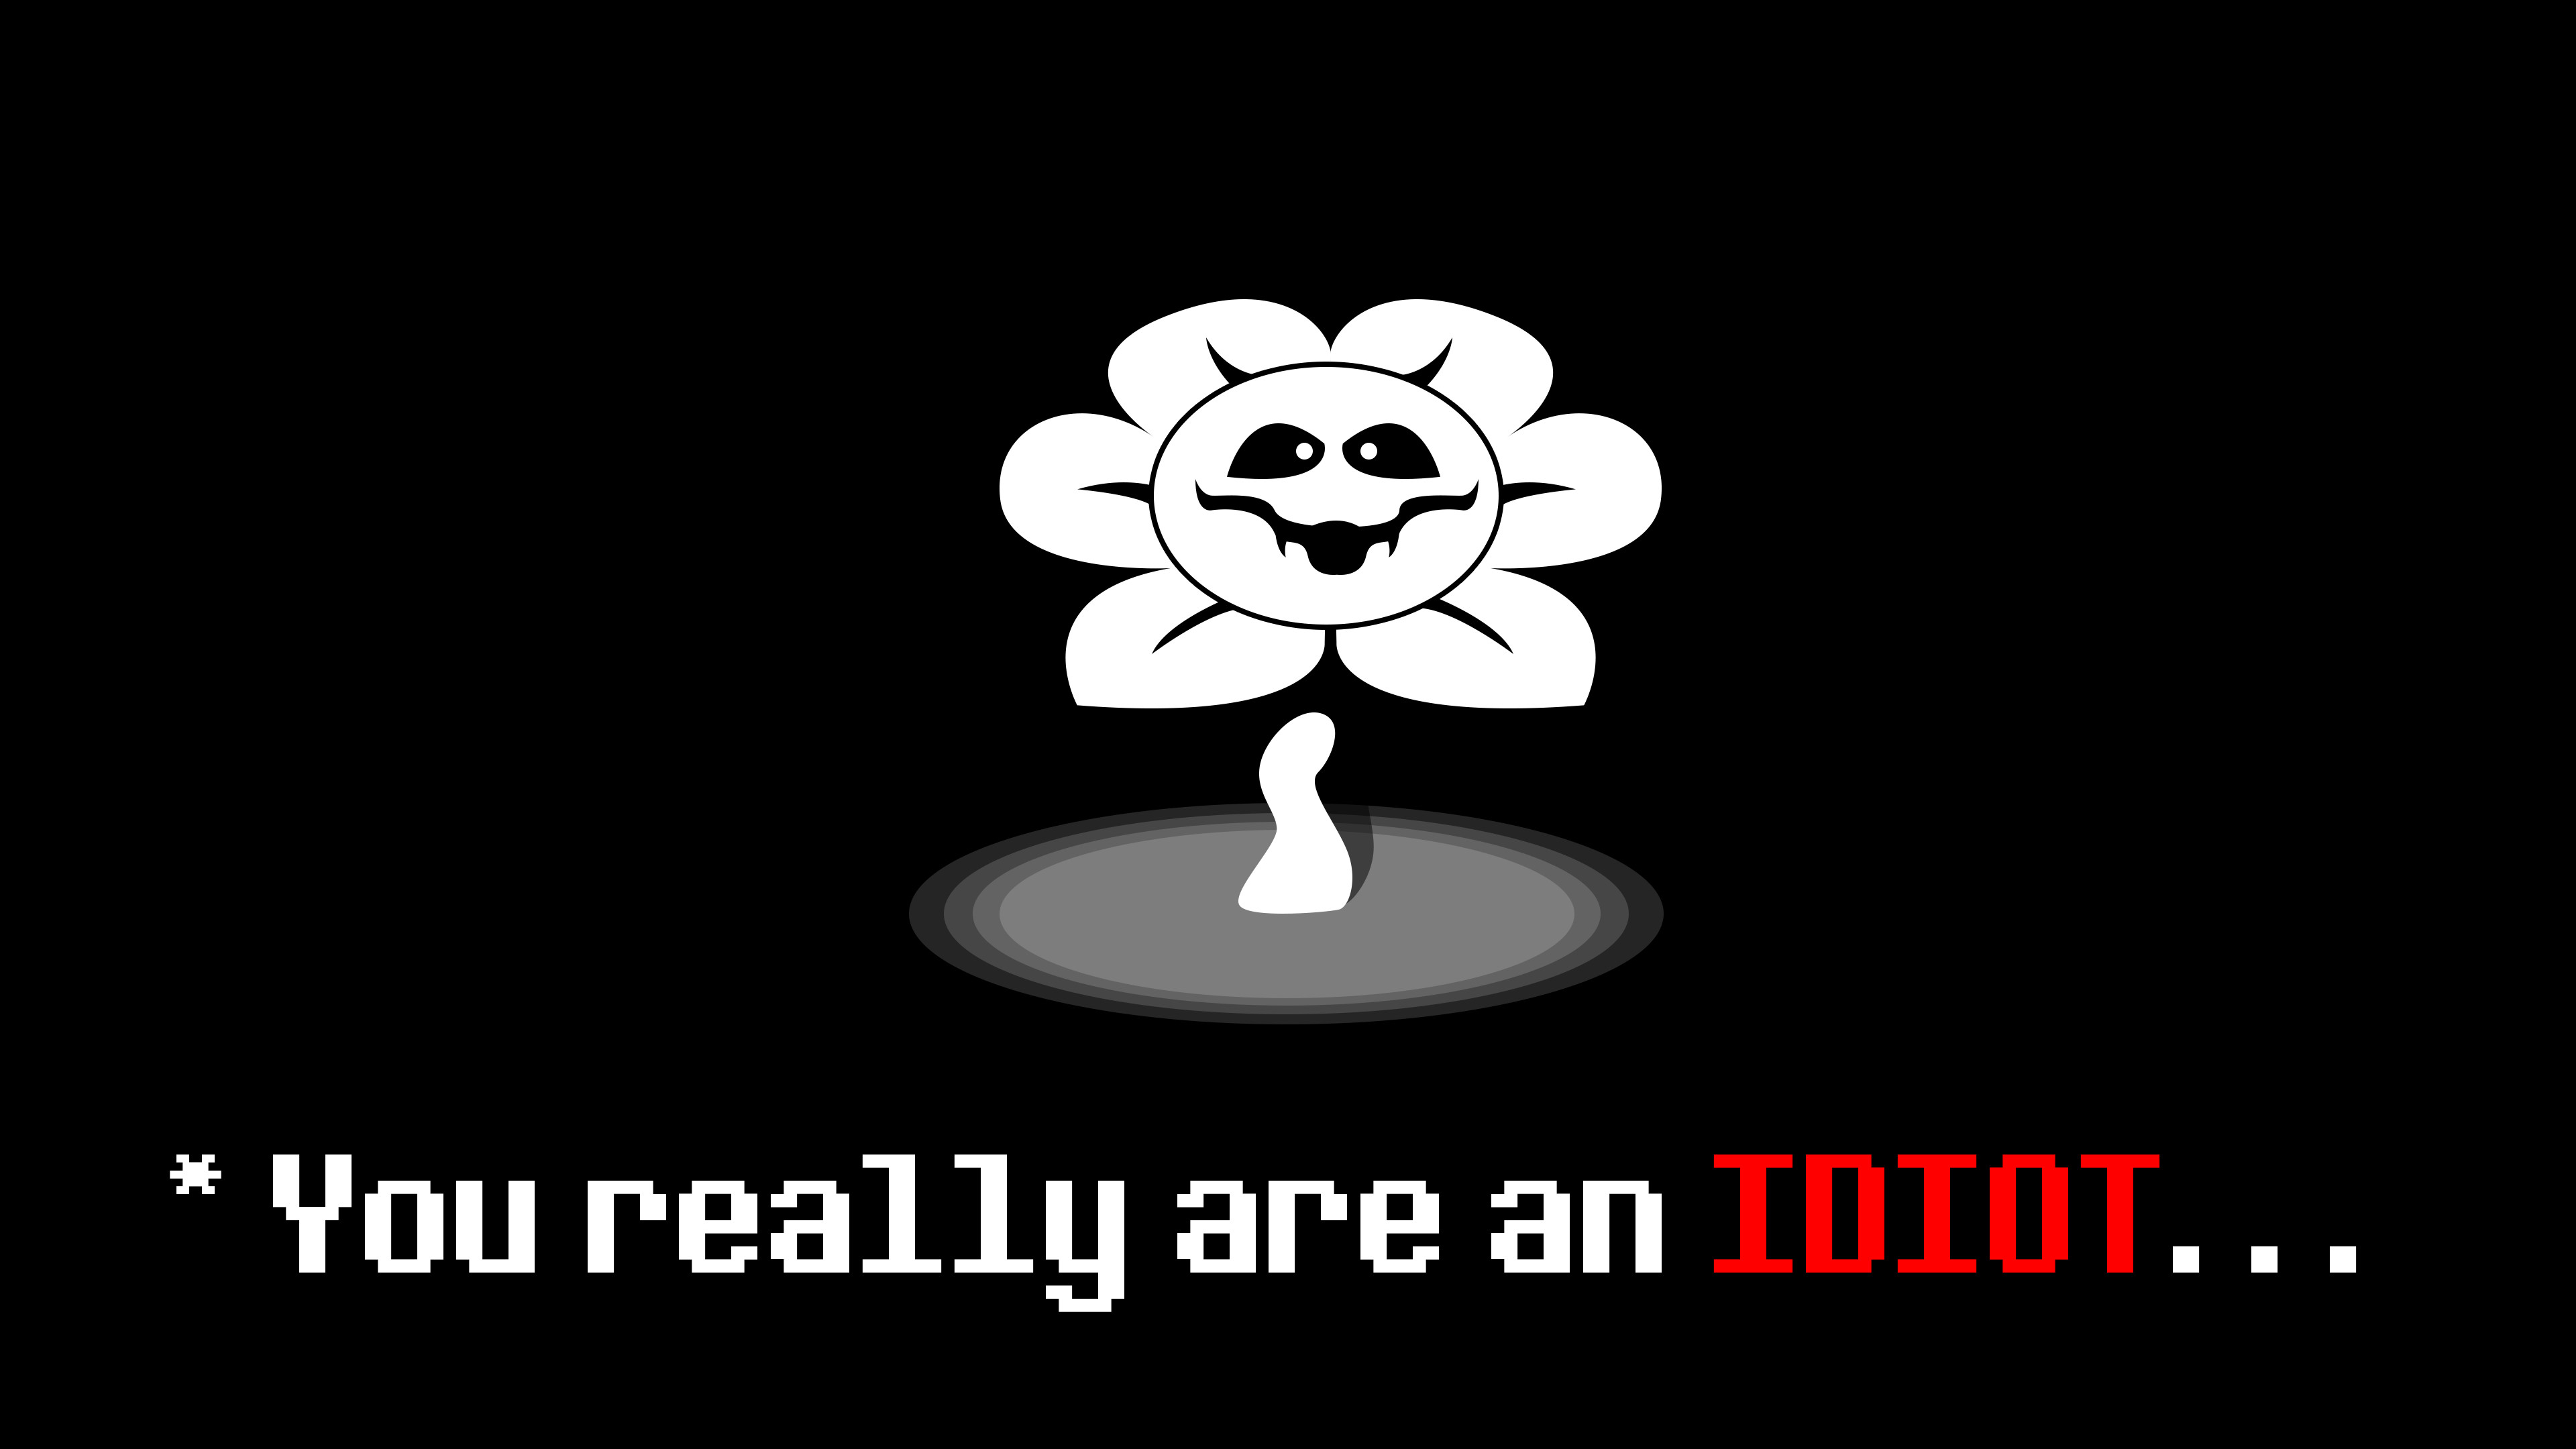 Flowey the flower wallpaper I quickly created. Undertale